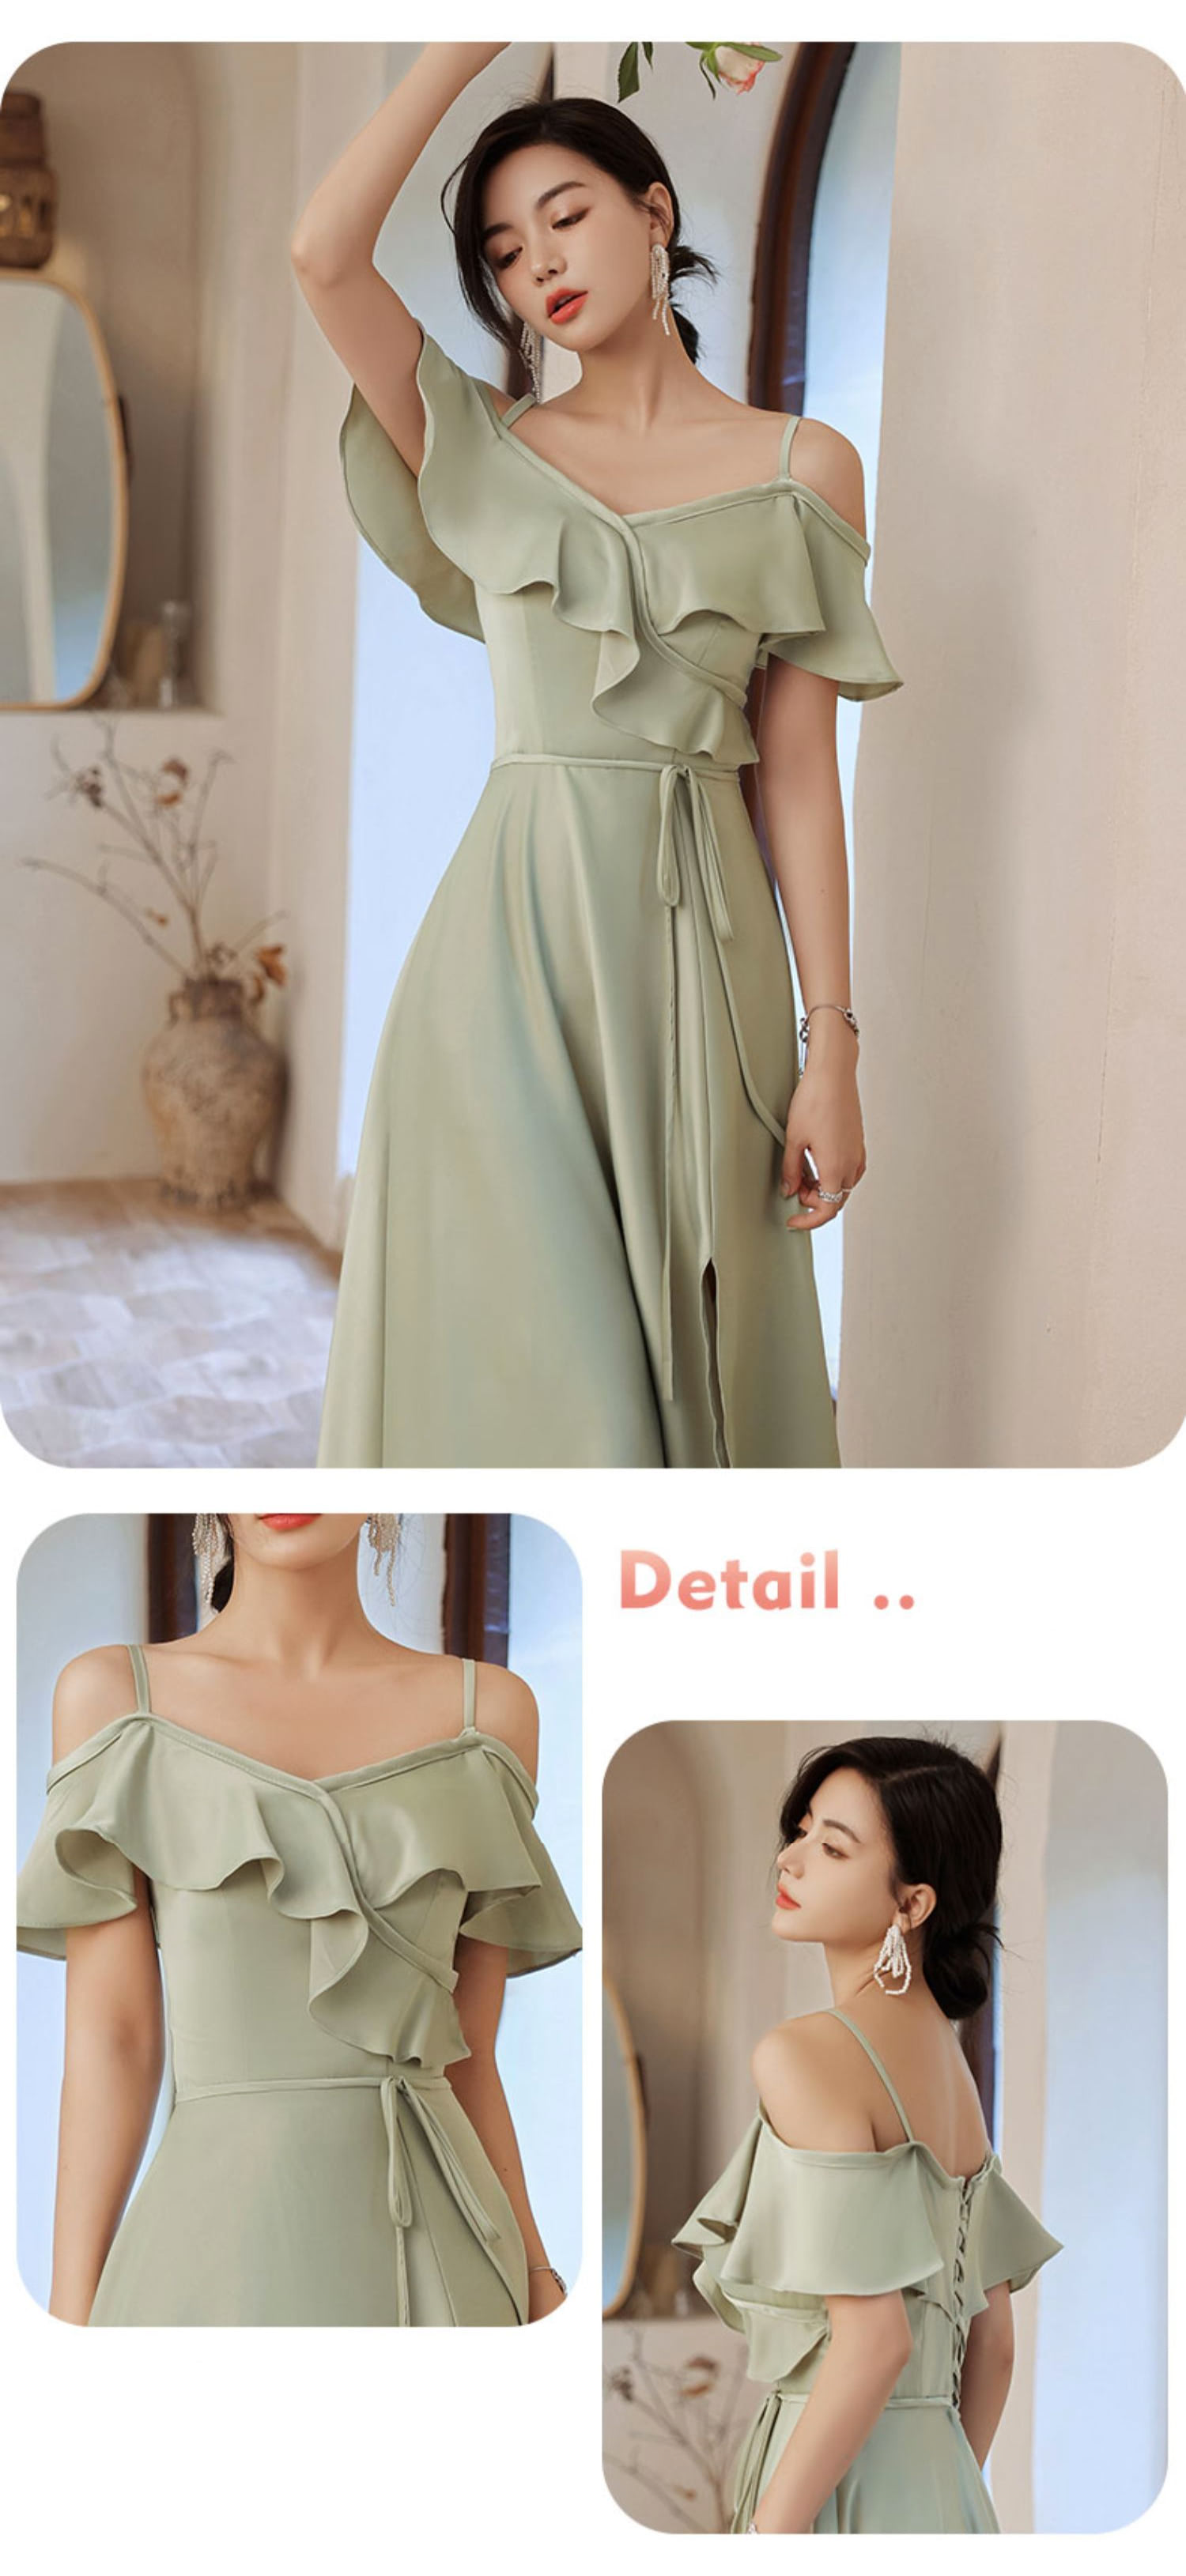 Simple-Olive-Green-Satin-Bridesmaid-Dress-Beach-Wedding-Guest-Outfit18